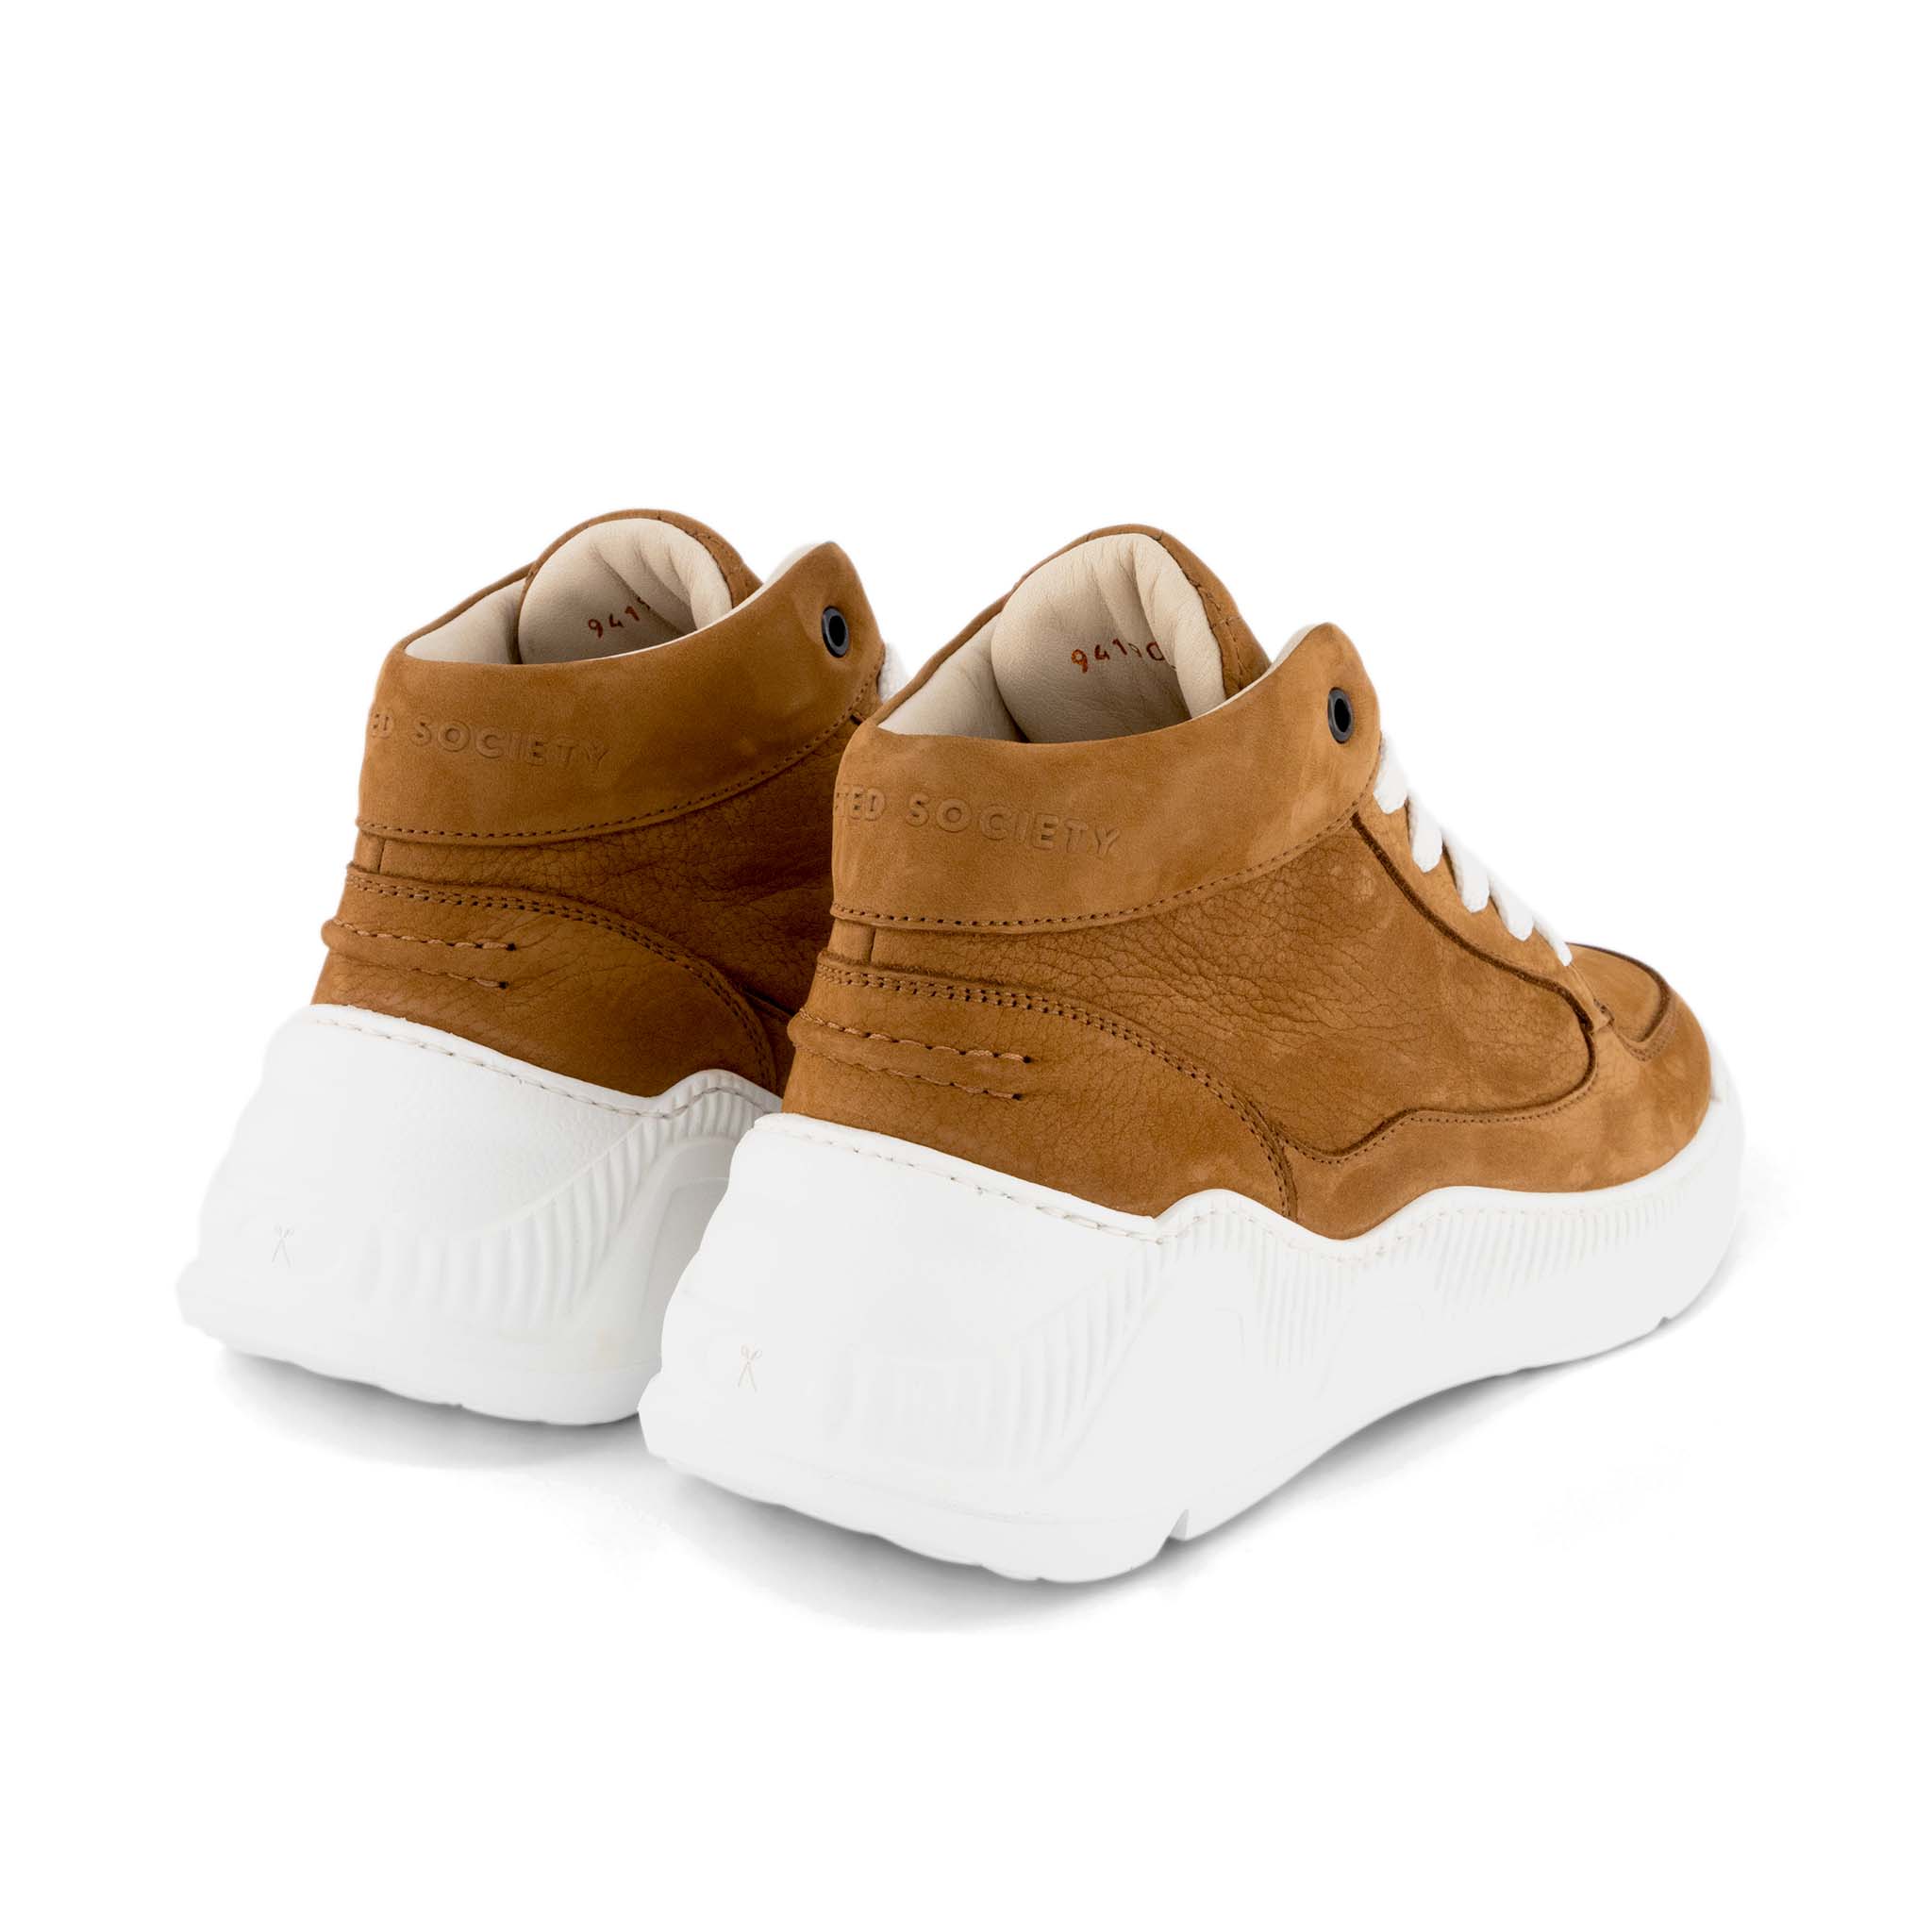 Dante Mid Top Sneaker | Cognac Nubuck Italian Leather | White Outsole | Made in Italy